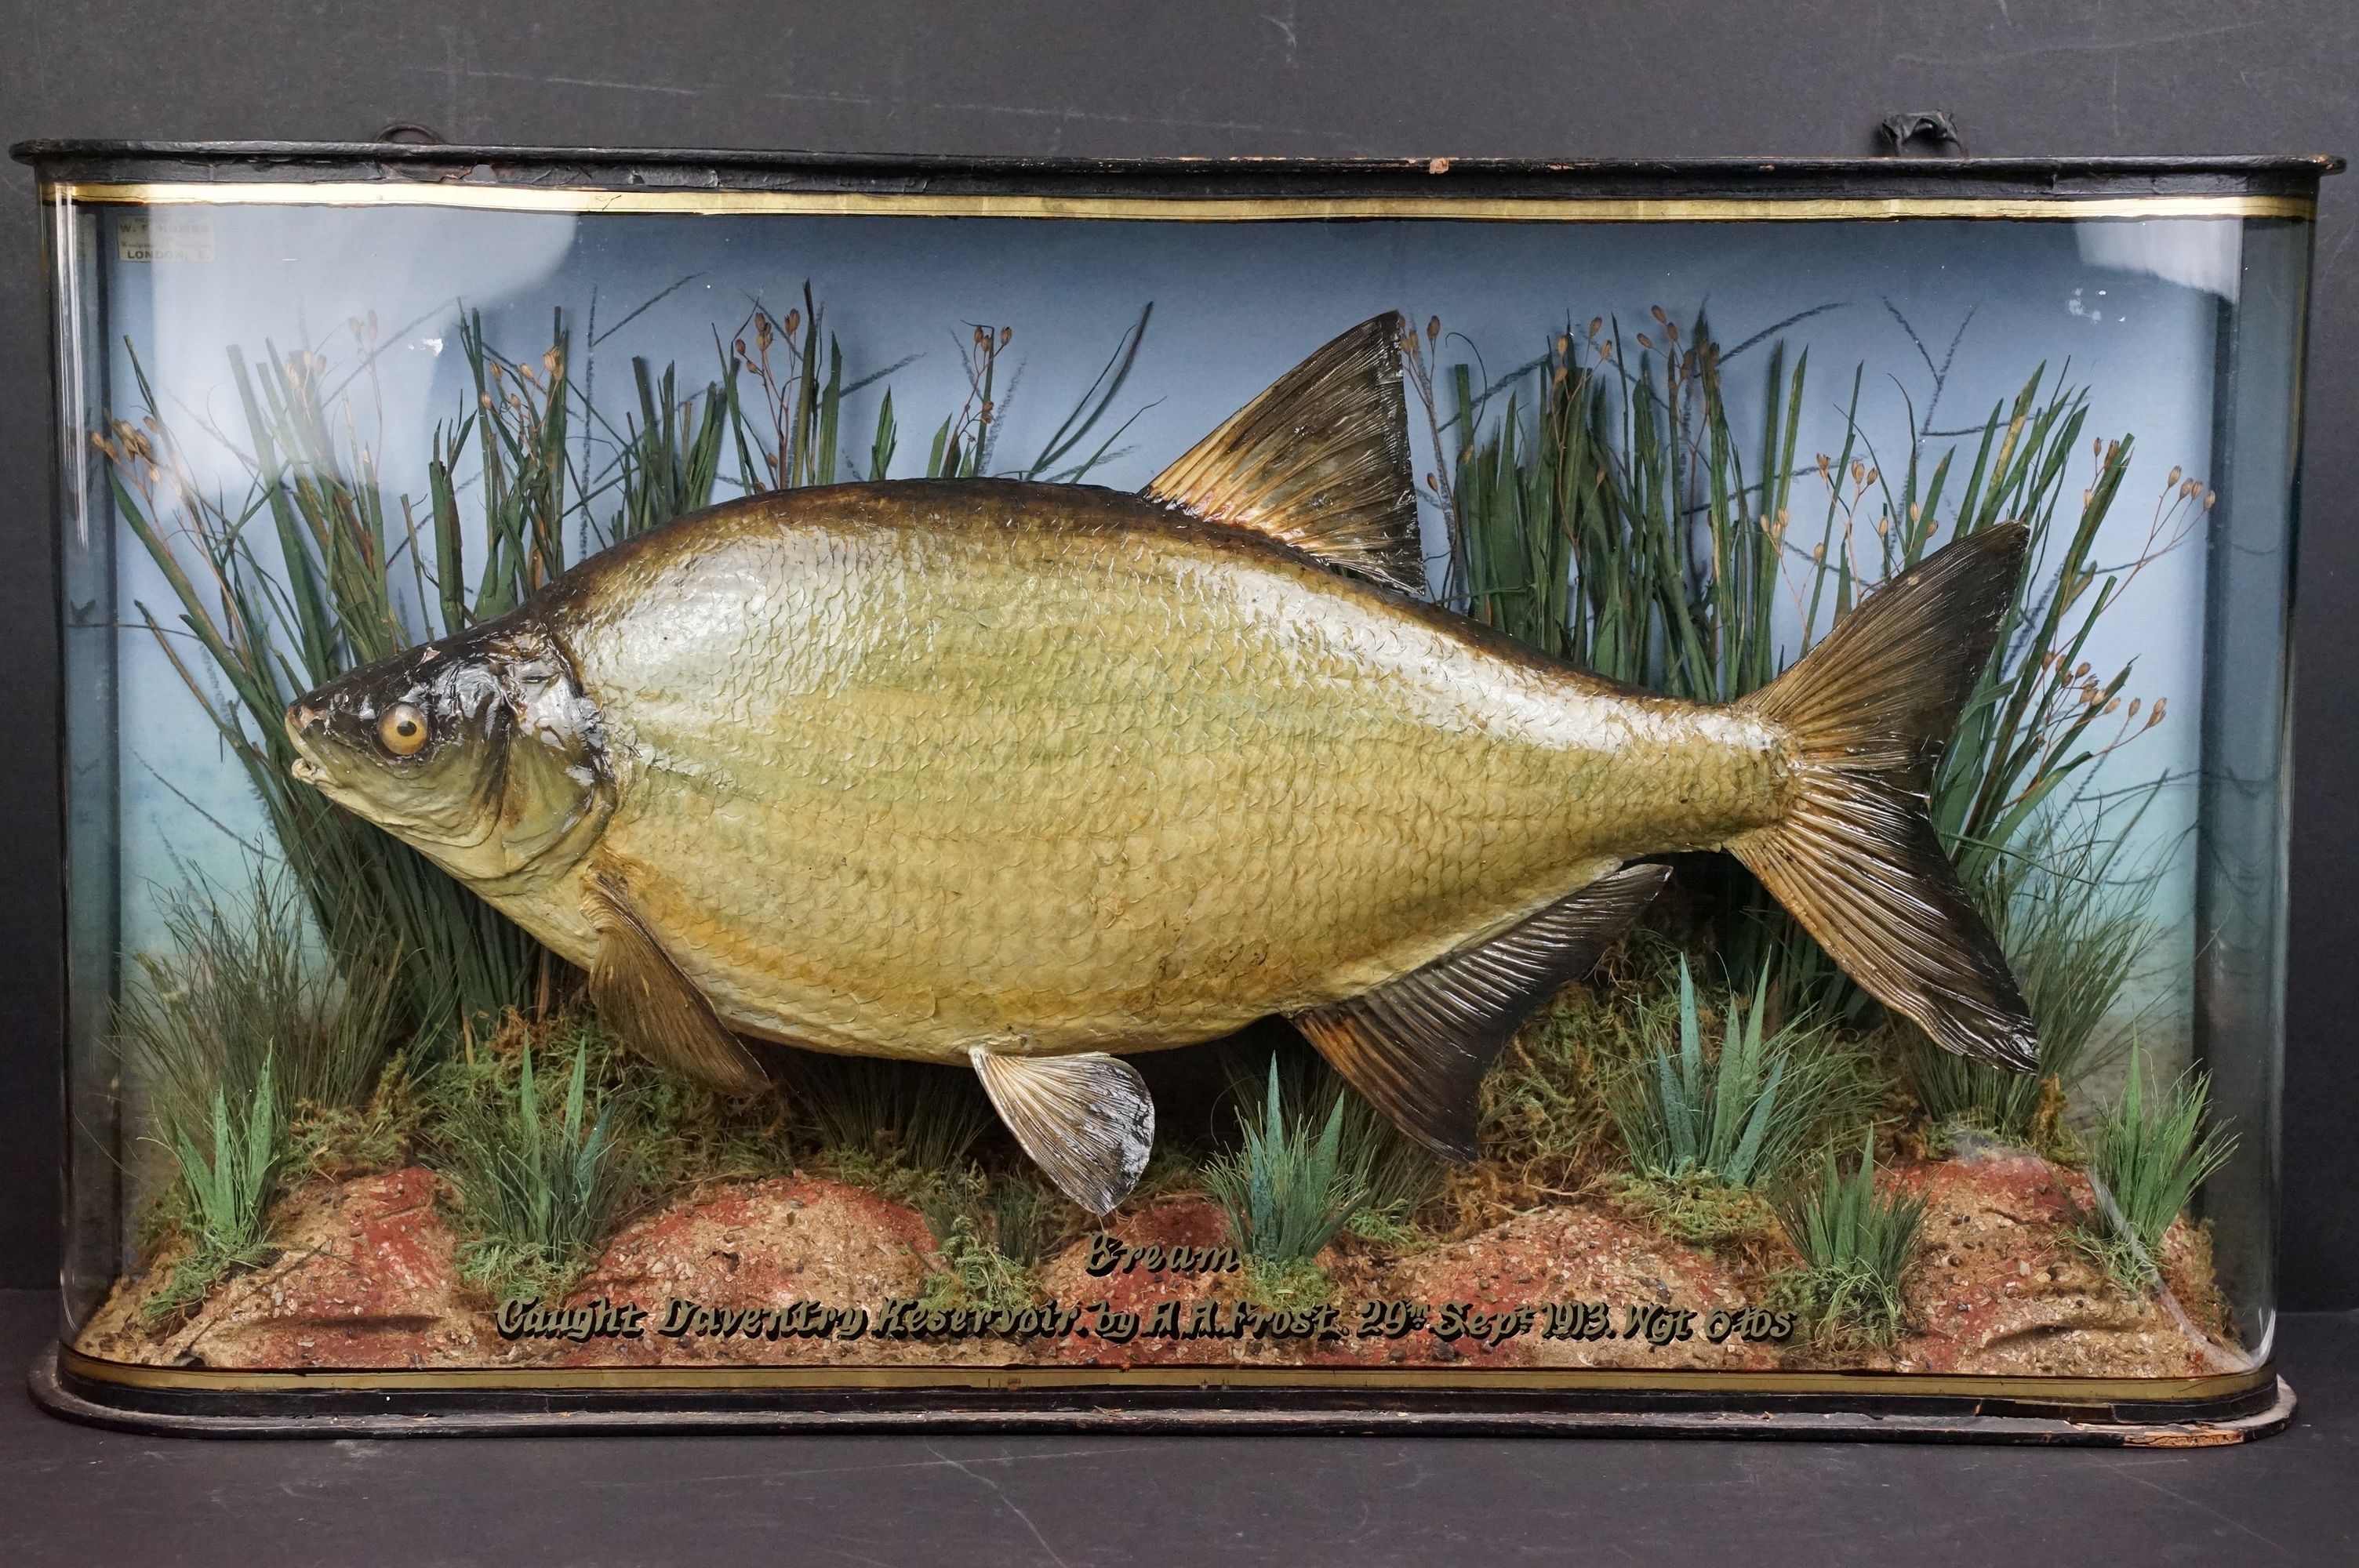 Taxidermy - An early 20th century taxidermy Bream, preserved by W. F. Homer (preserver label to case